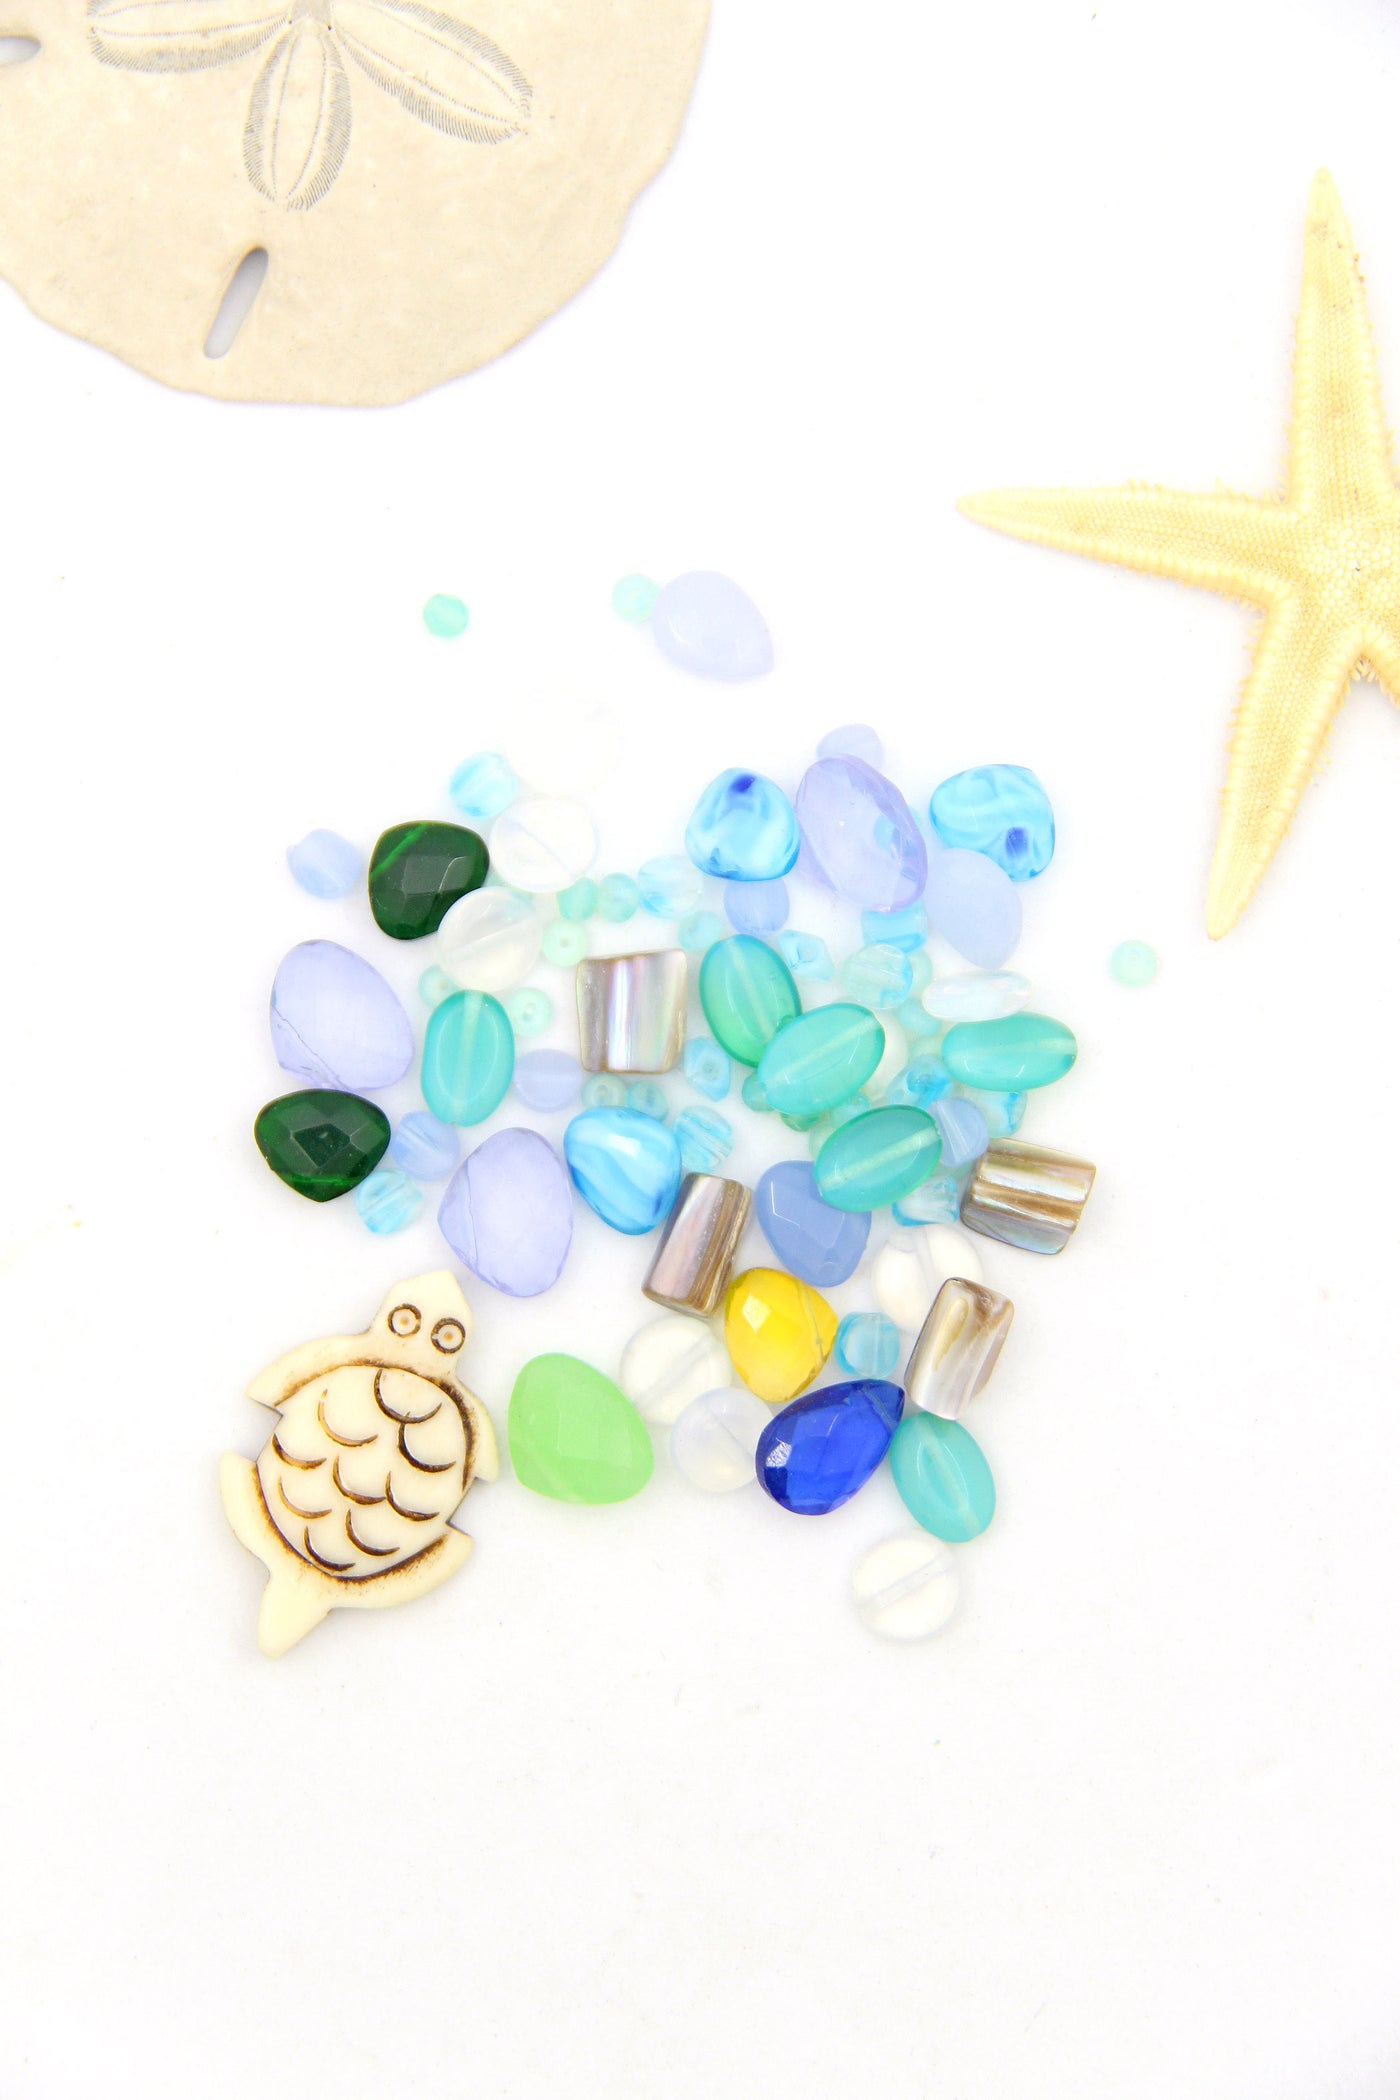 Surfside Glass Bead Grab Bag, Faceted Glass, Opalite, Bead Soup, 50+ Beads, Turtle Charm